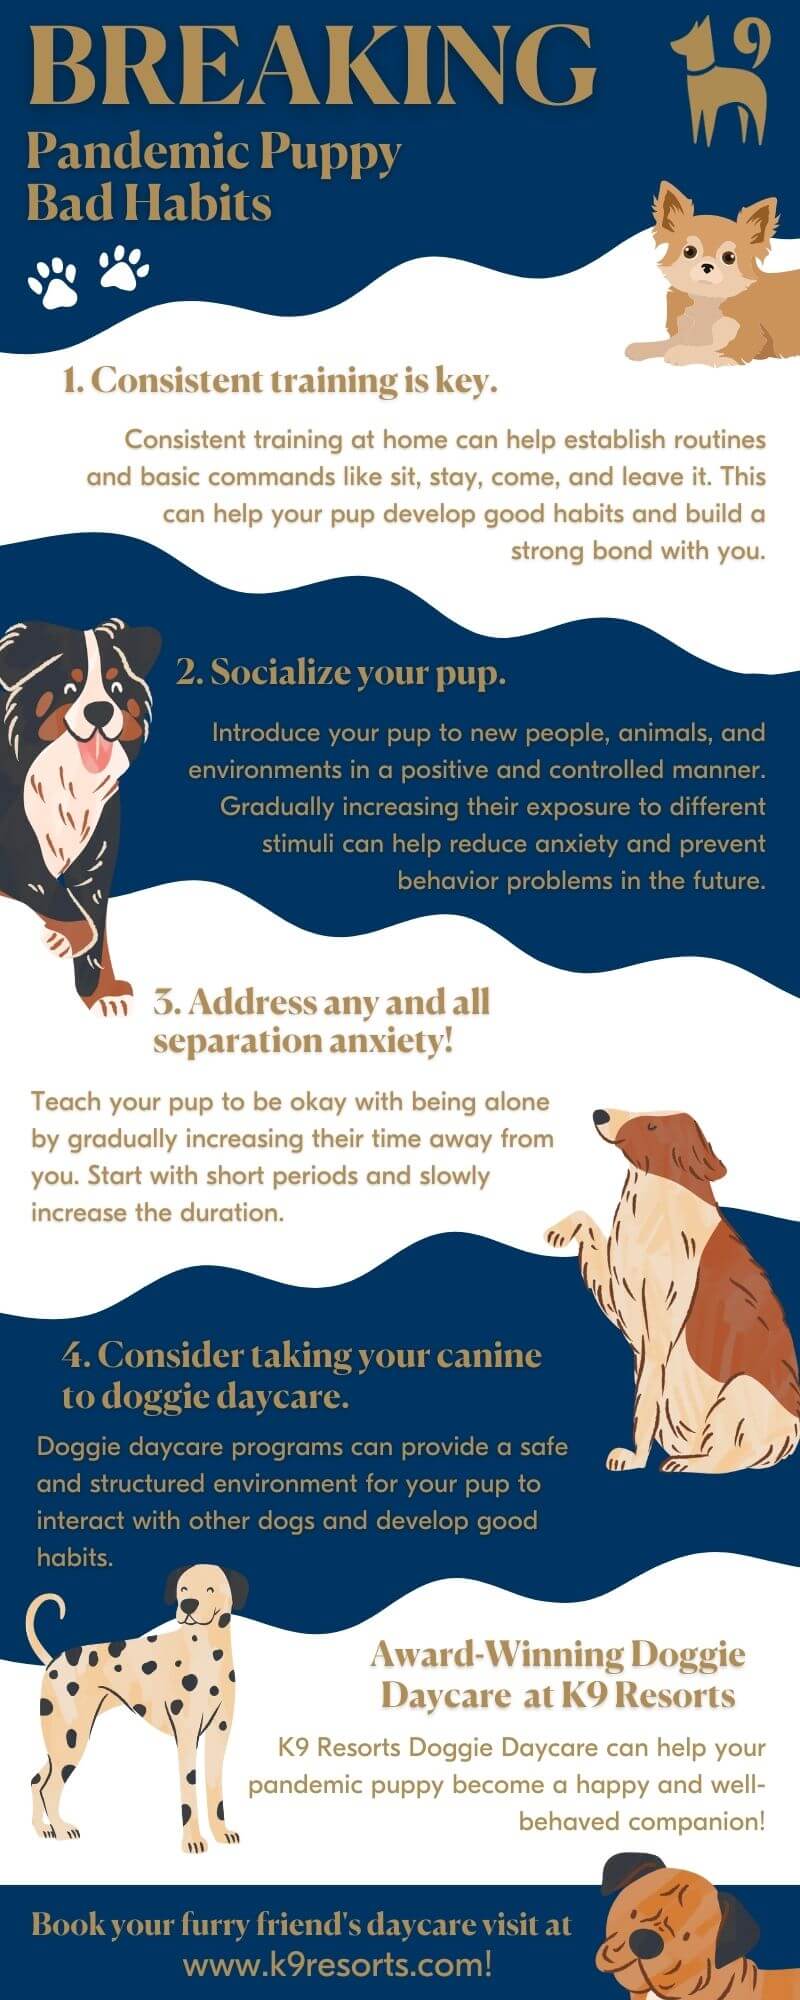 Puppy Behavior and Training - Dealing with Undesirable Behavior